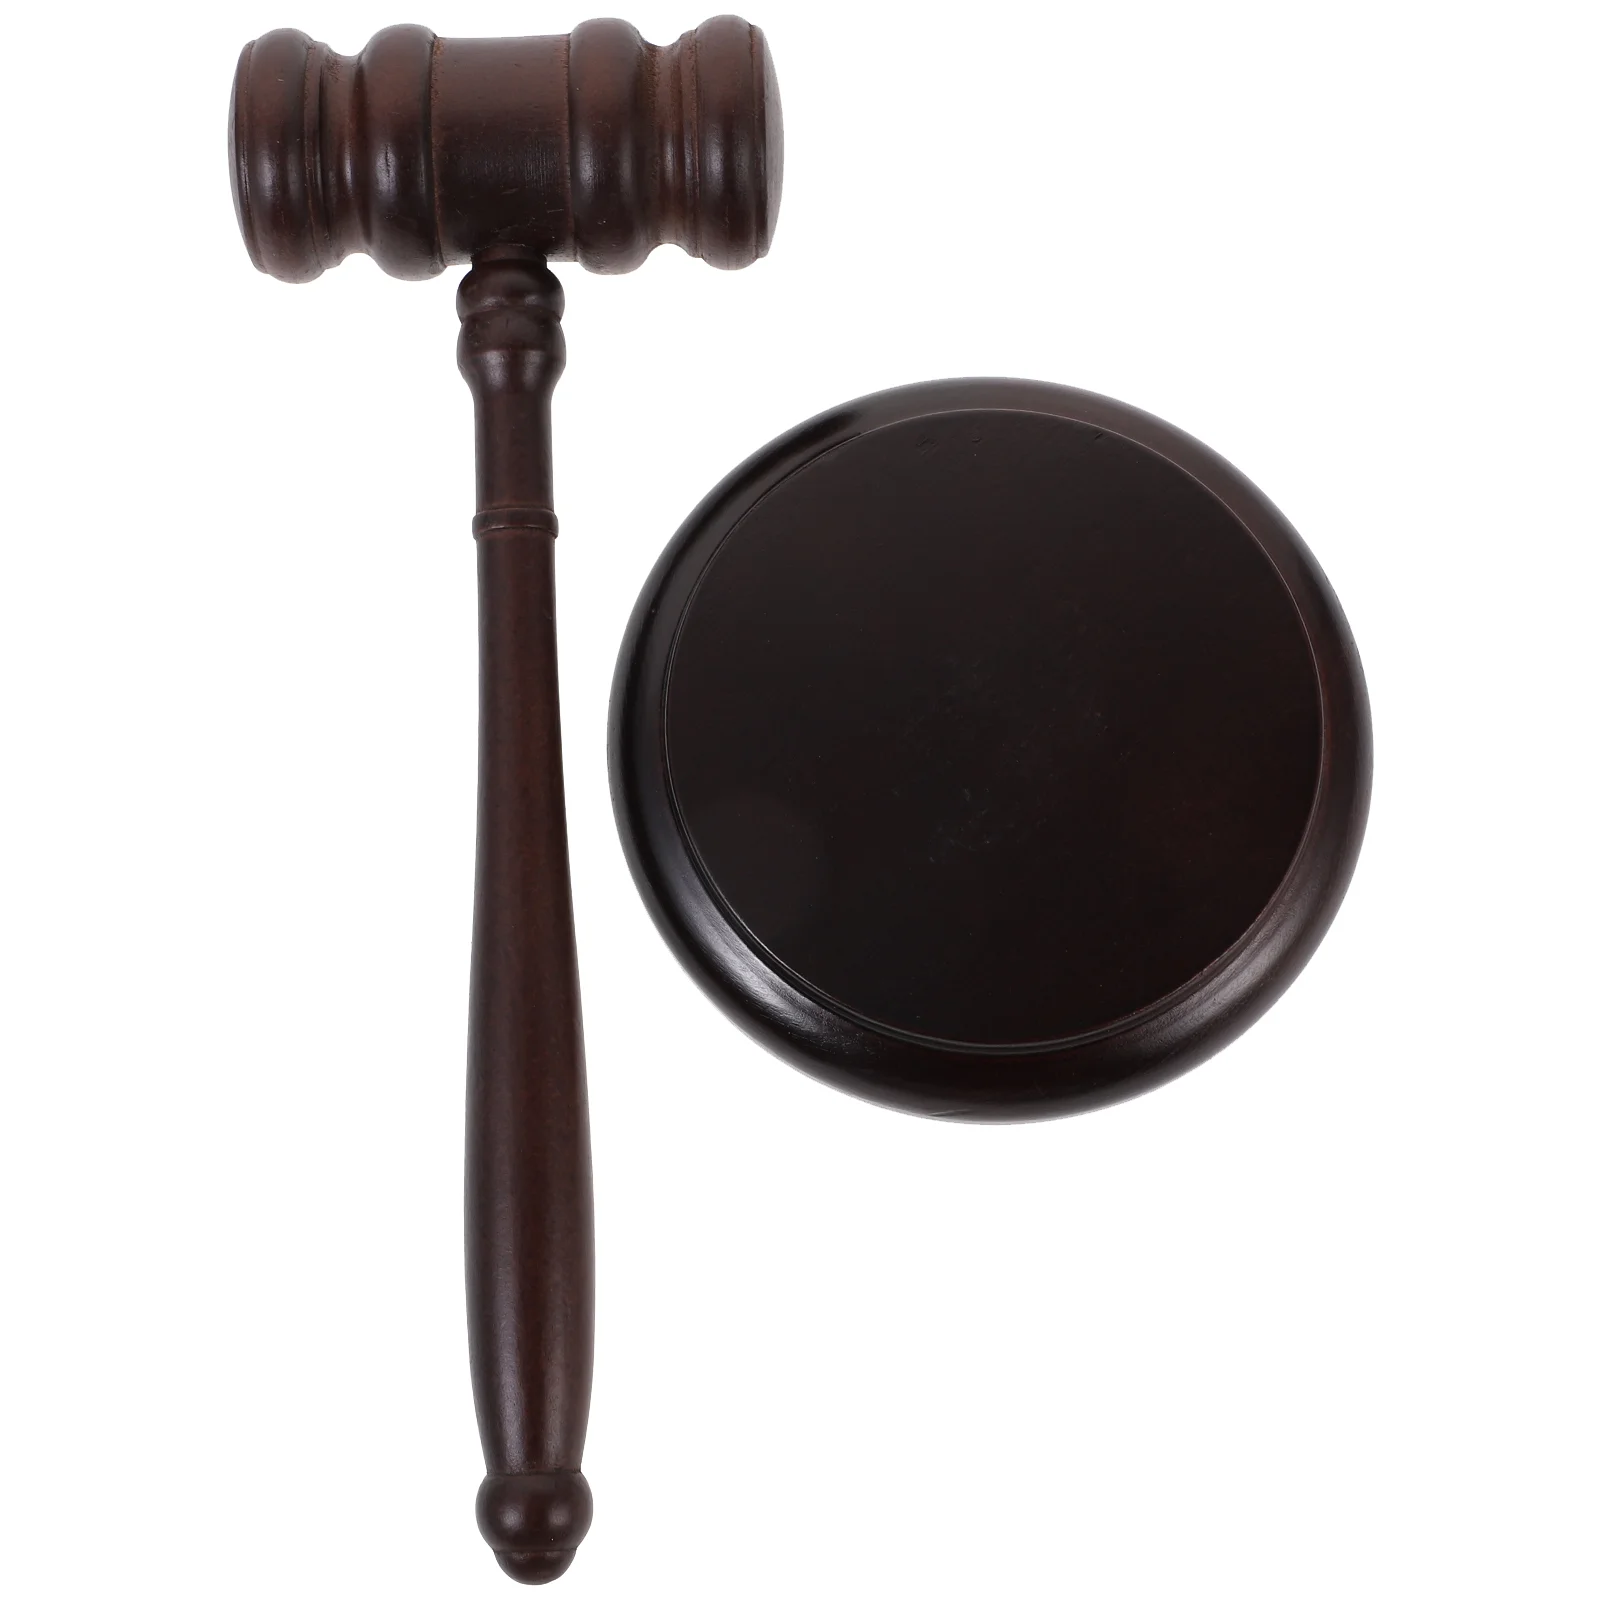 

Auction Hammer Mallet Prop Novel Plaything Mini Wooden Judge Knock Order Gavel Law Kids Costume Accessory Children Clothes